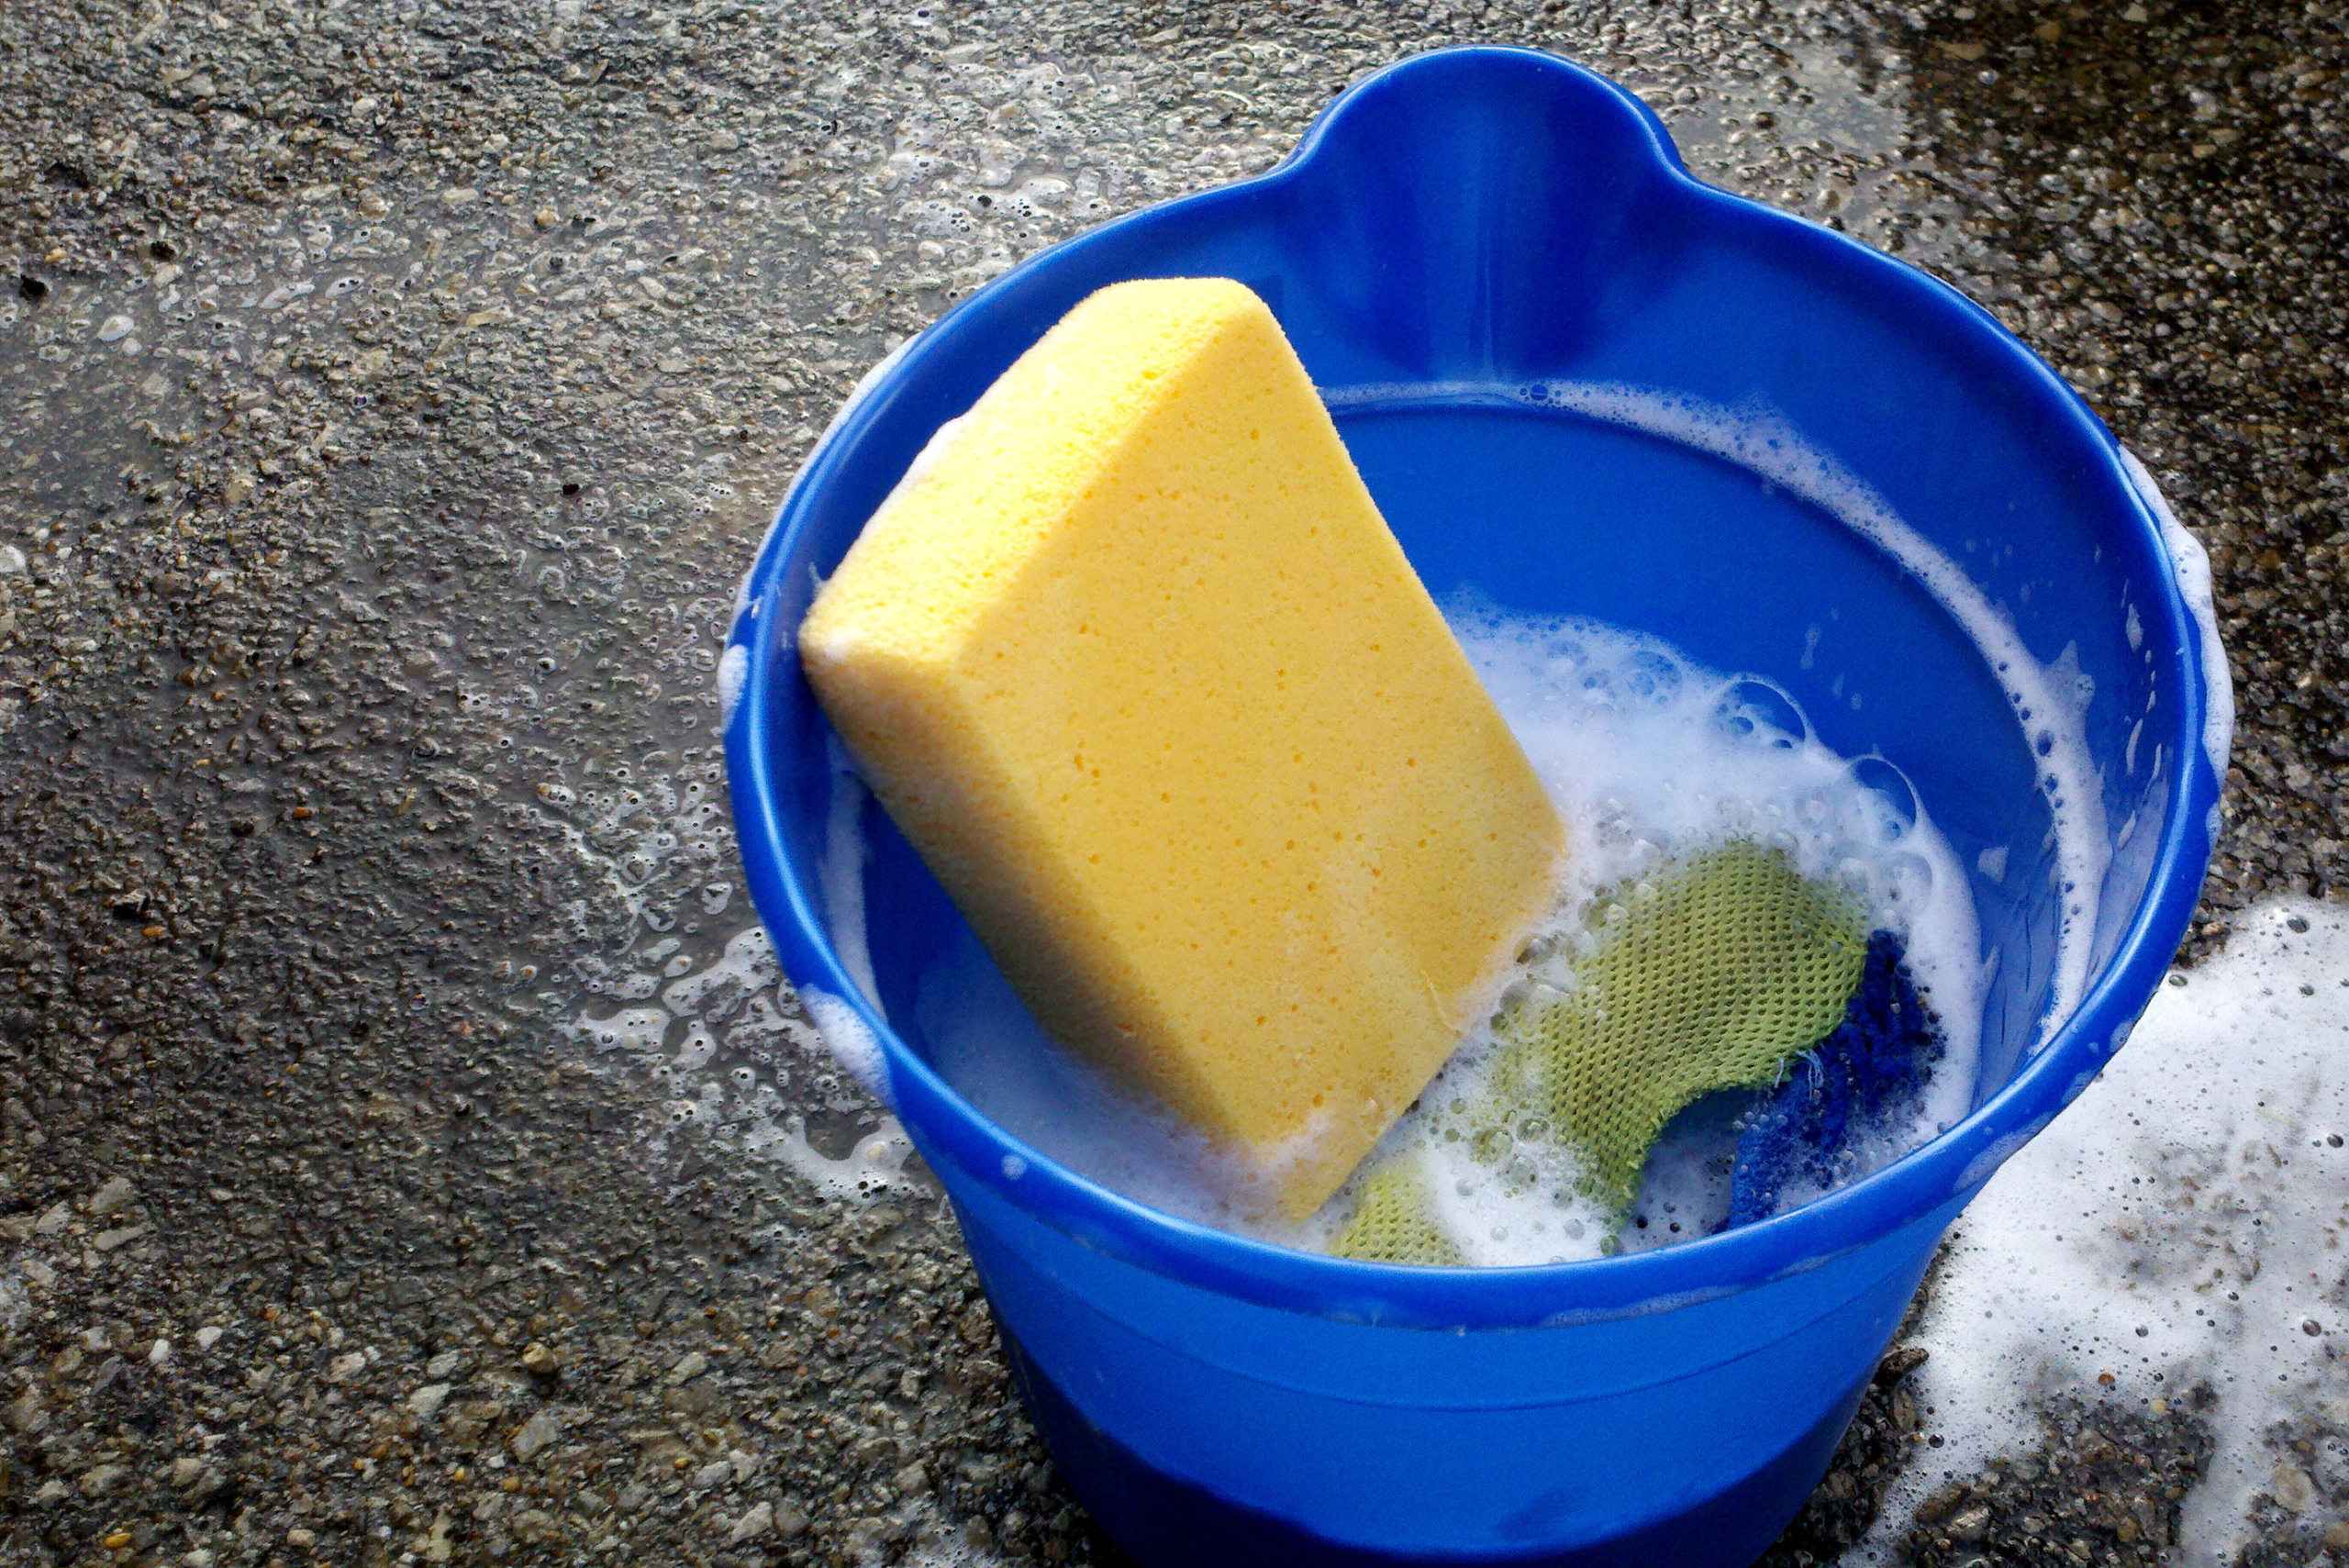 Bucket of soapy water and sponge.